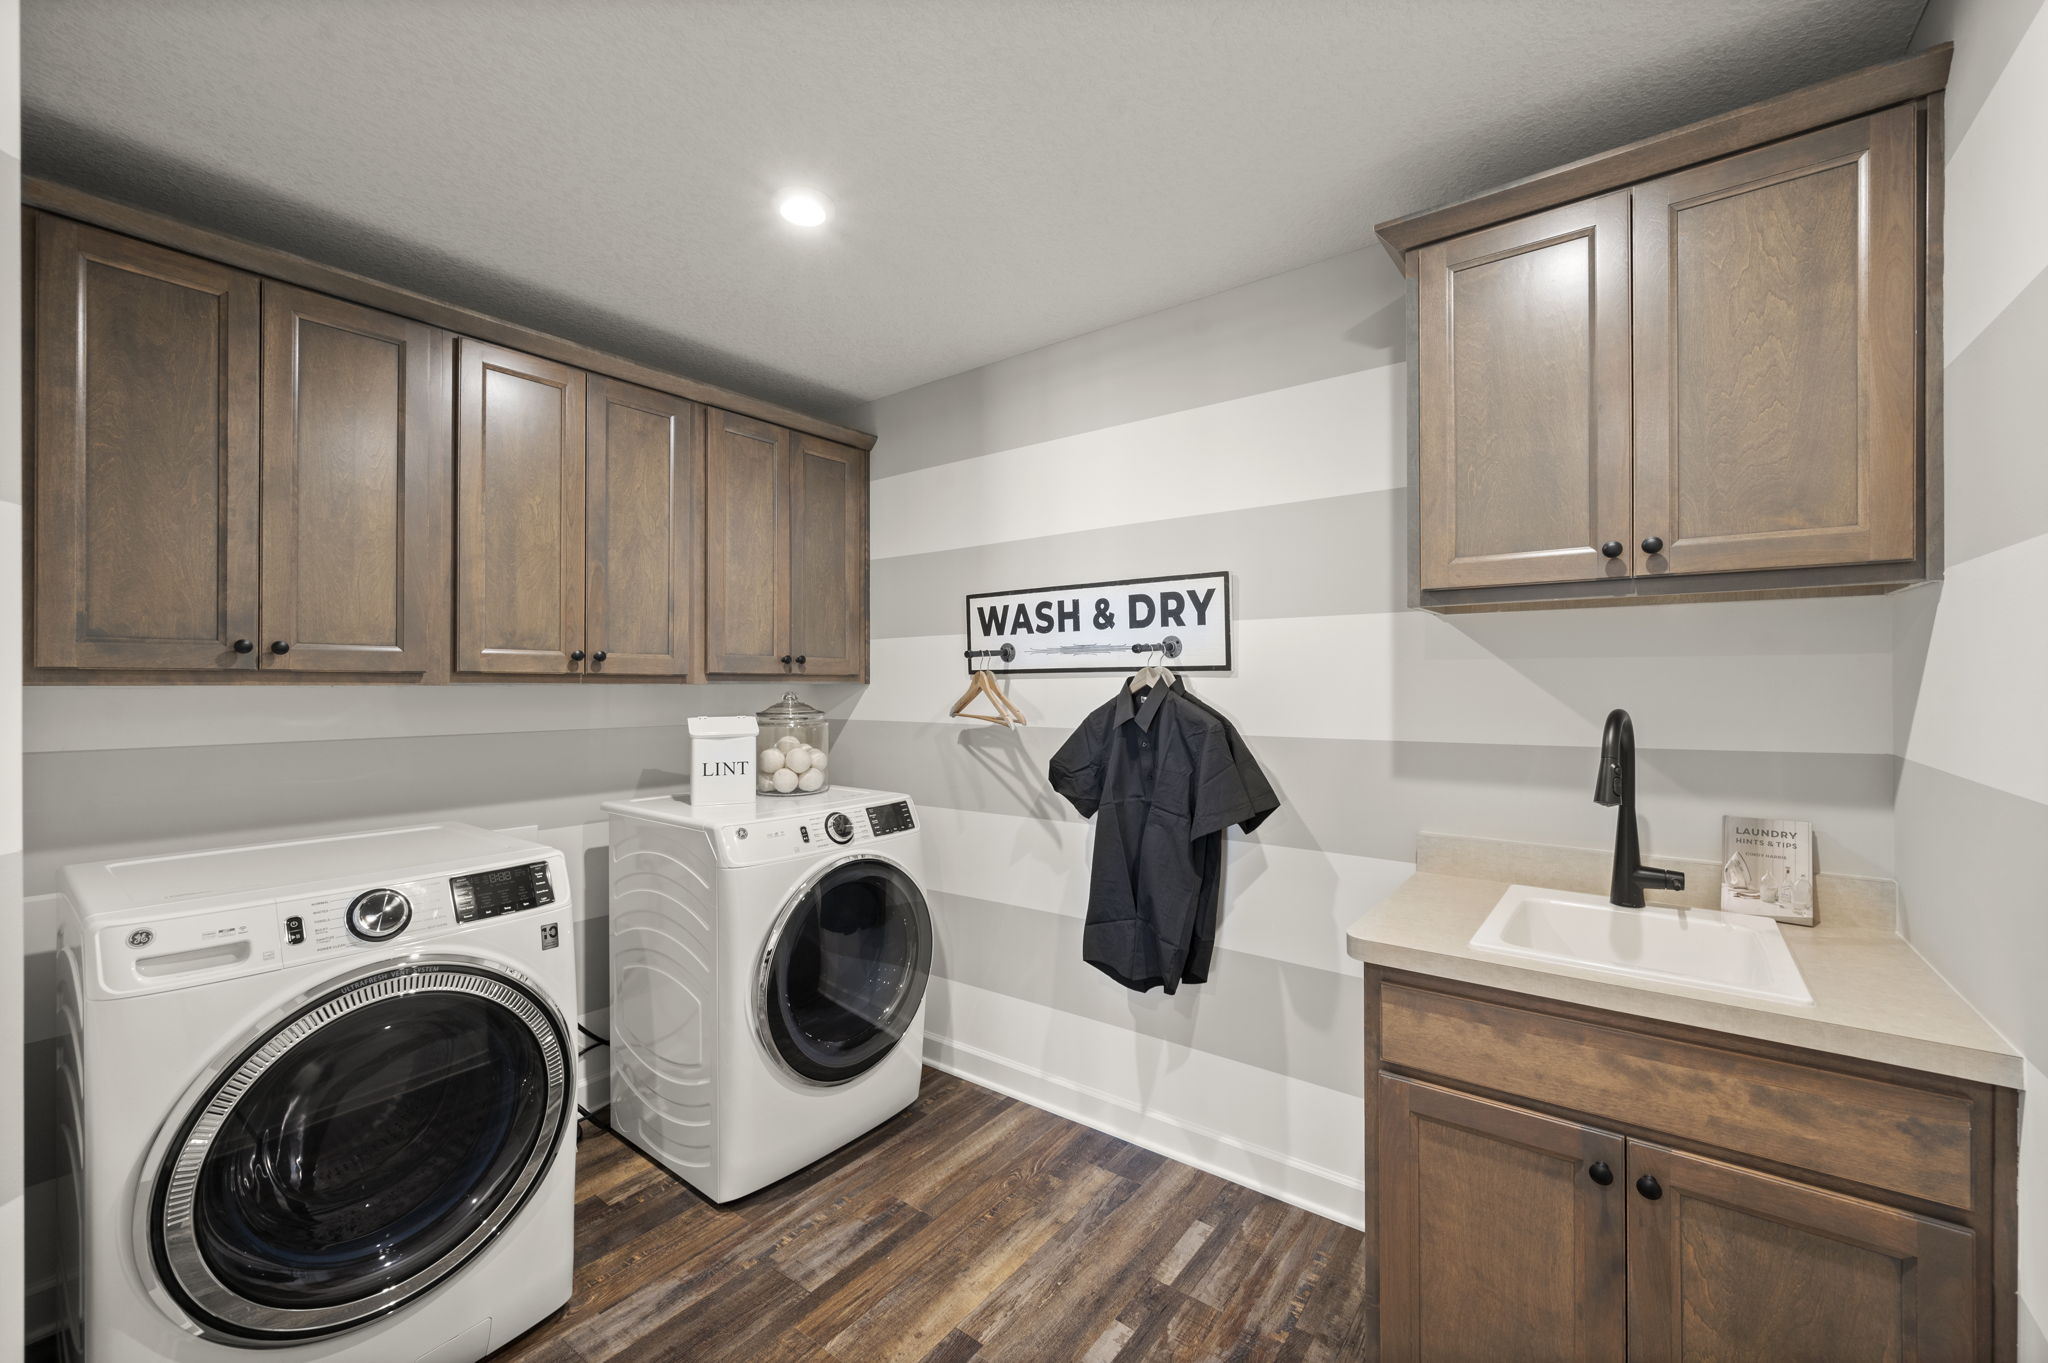 Laundry Room With Wash-Dry Wall Art / Hanging Rods